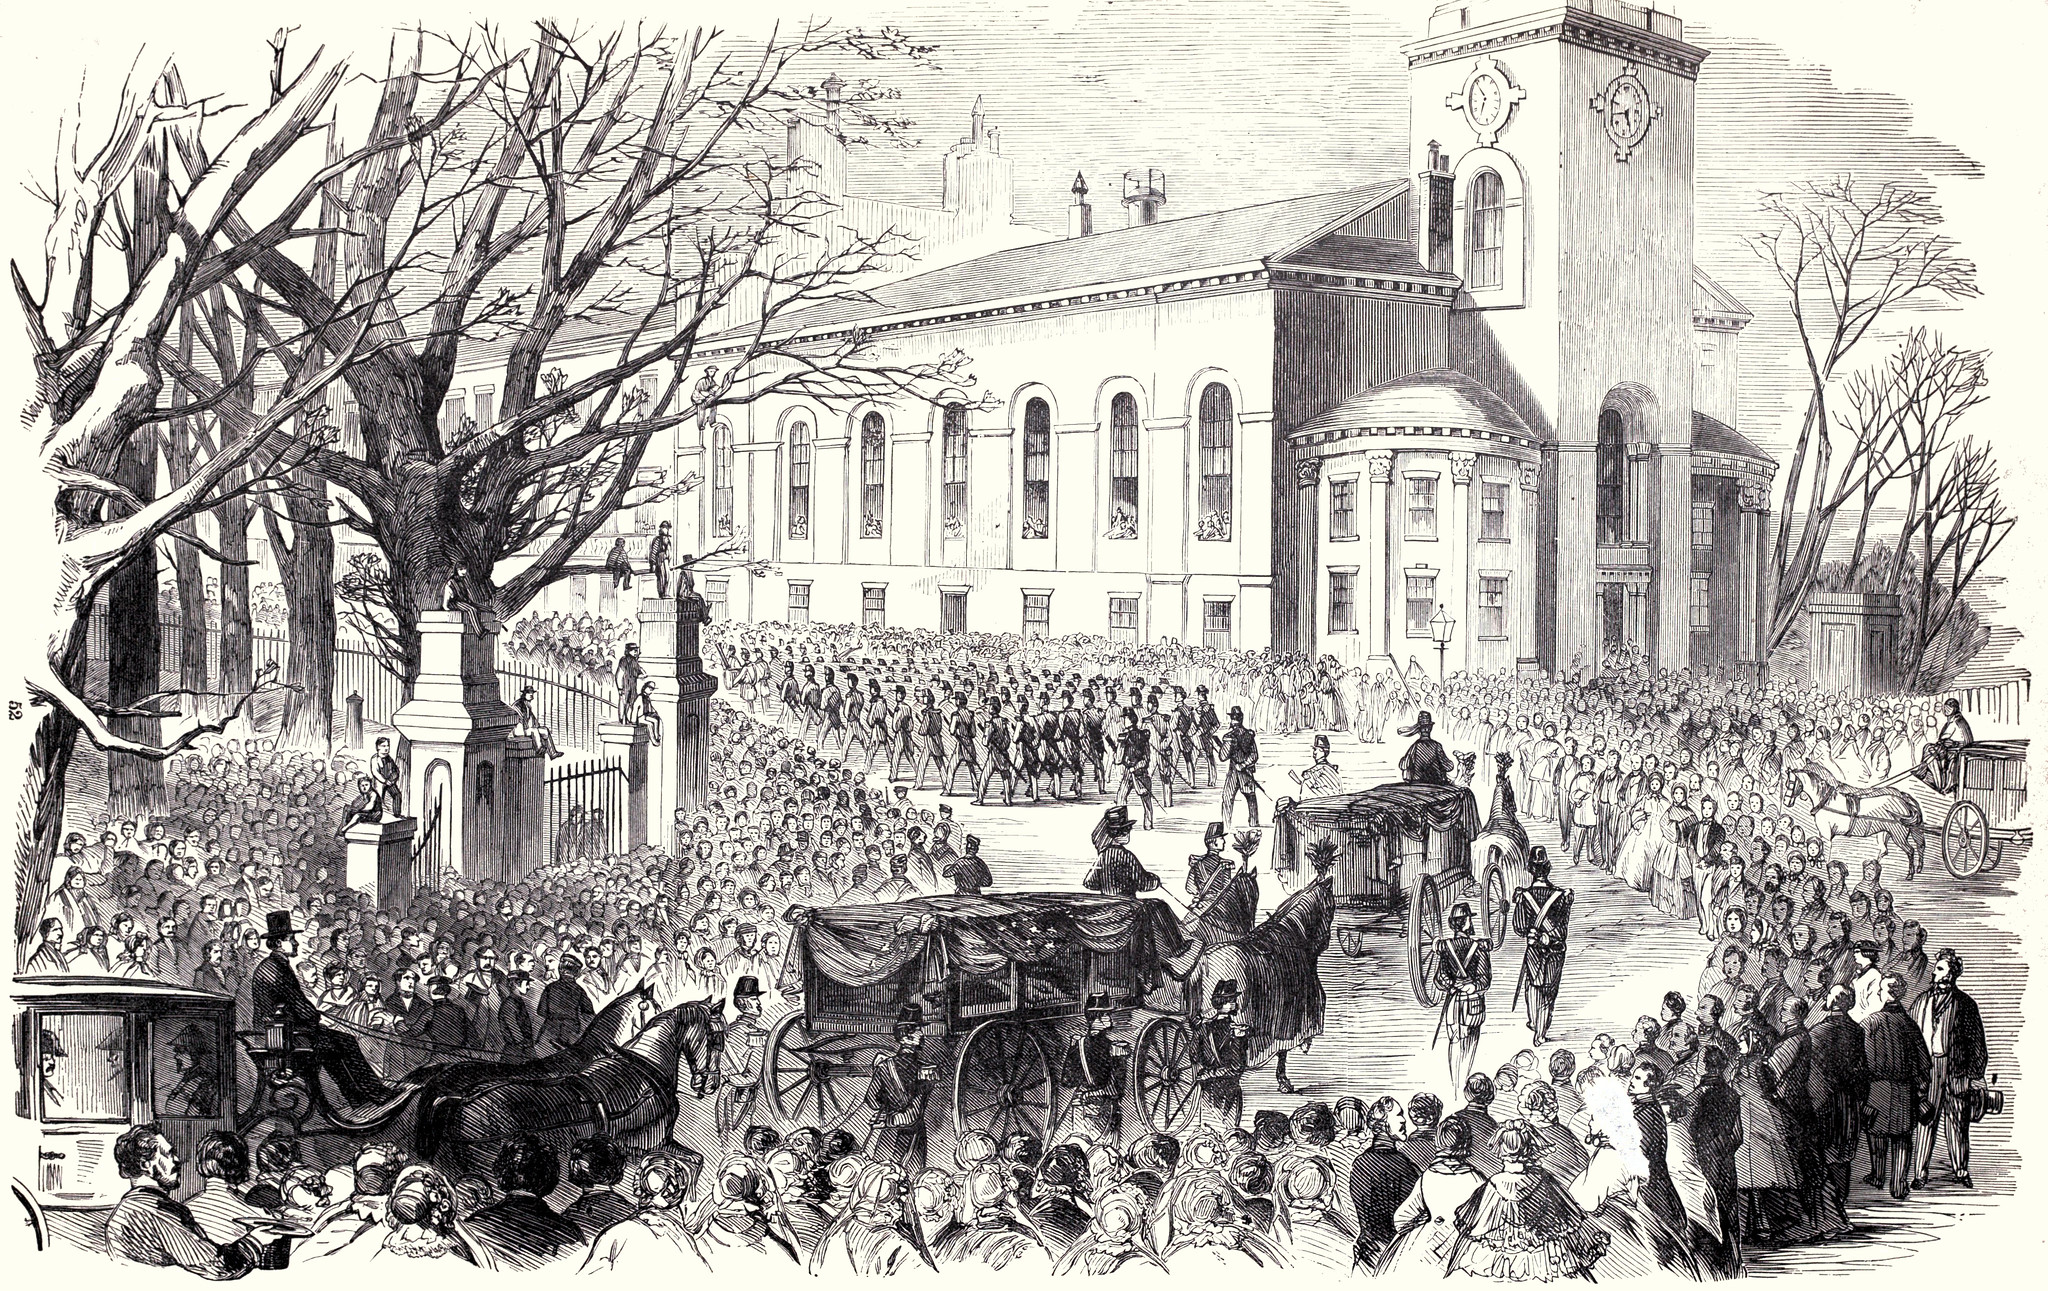 The Funeral Cortege, at Boston, Mass., of the Sixth Massachusetts Soldiers Killed at Baltimore